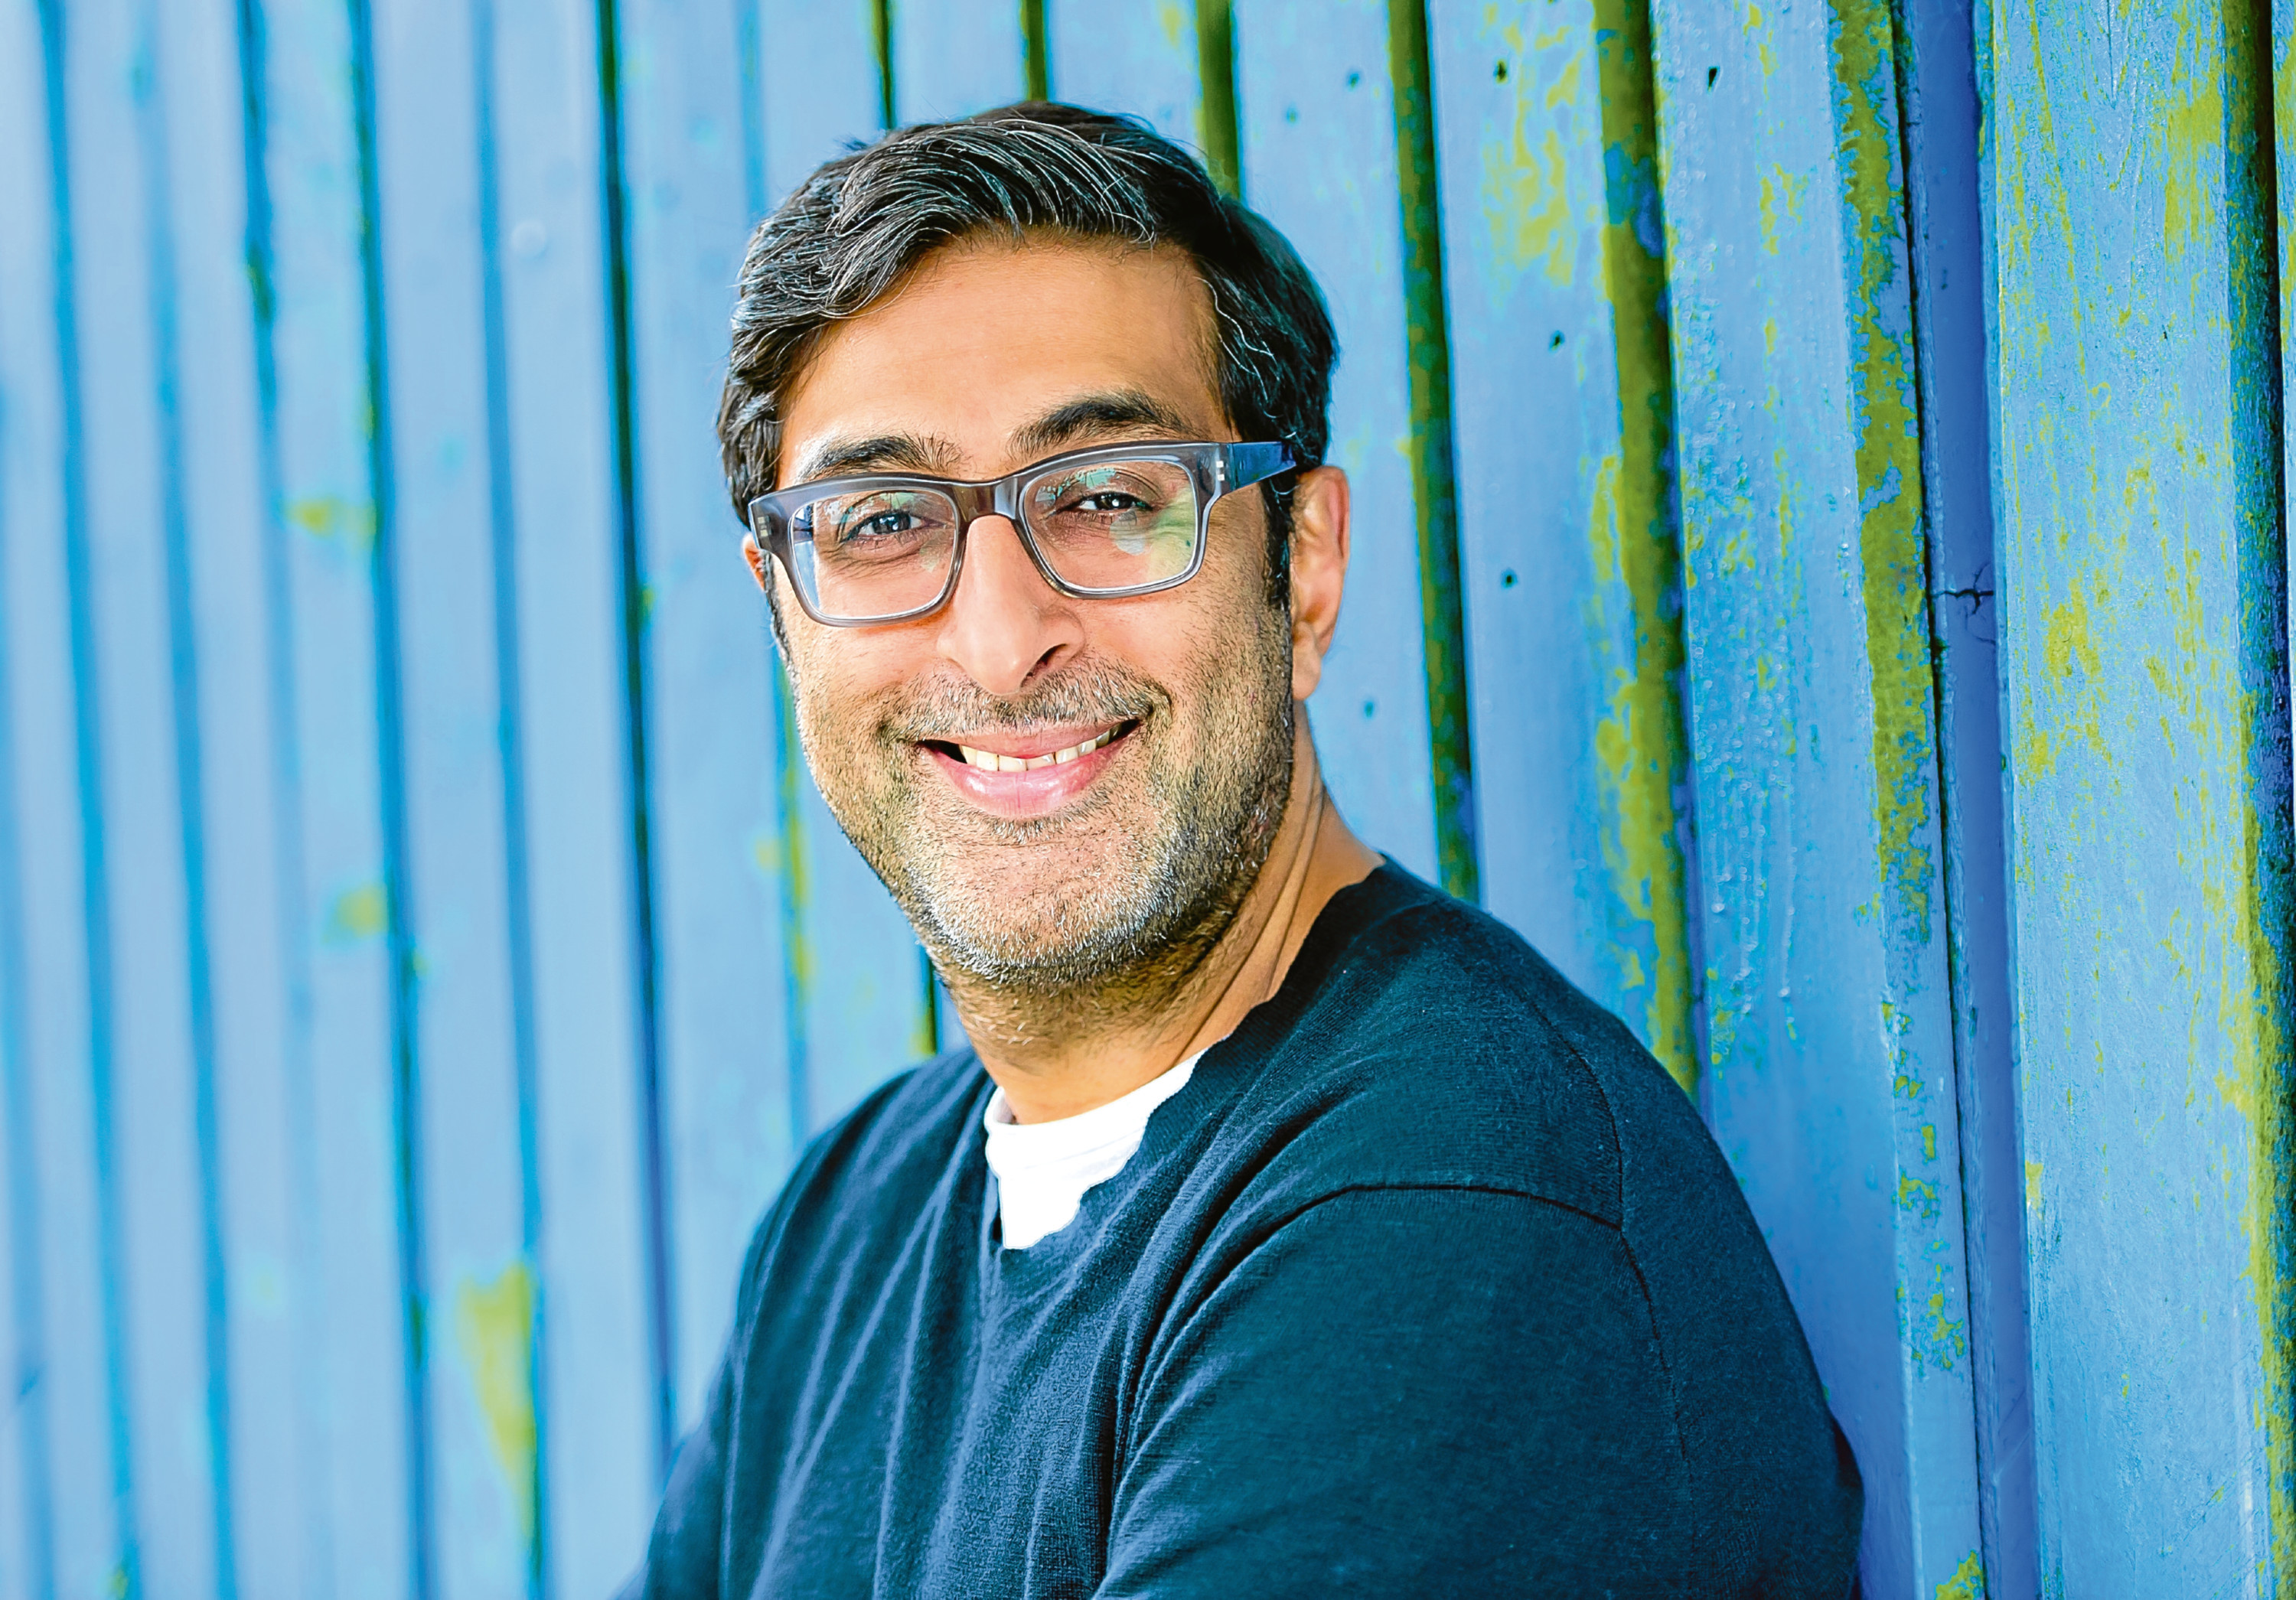 “Punch up, never punch down”: Life according to Still Game star, Sanjeev Kohli